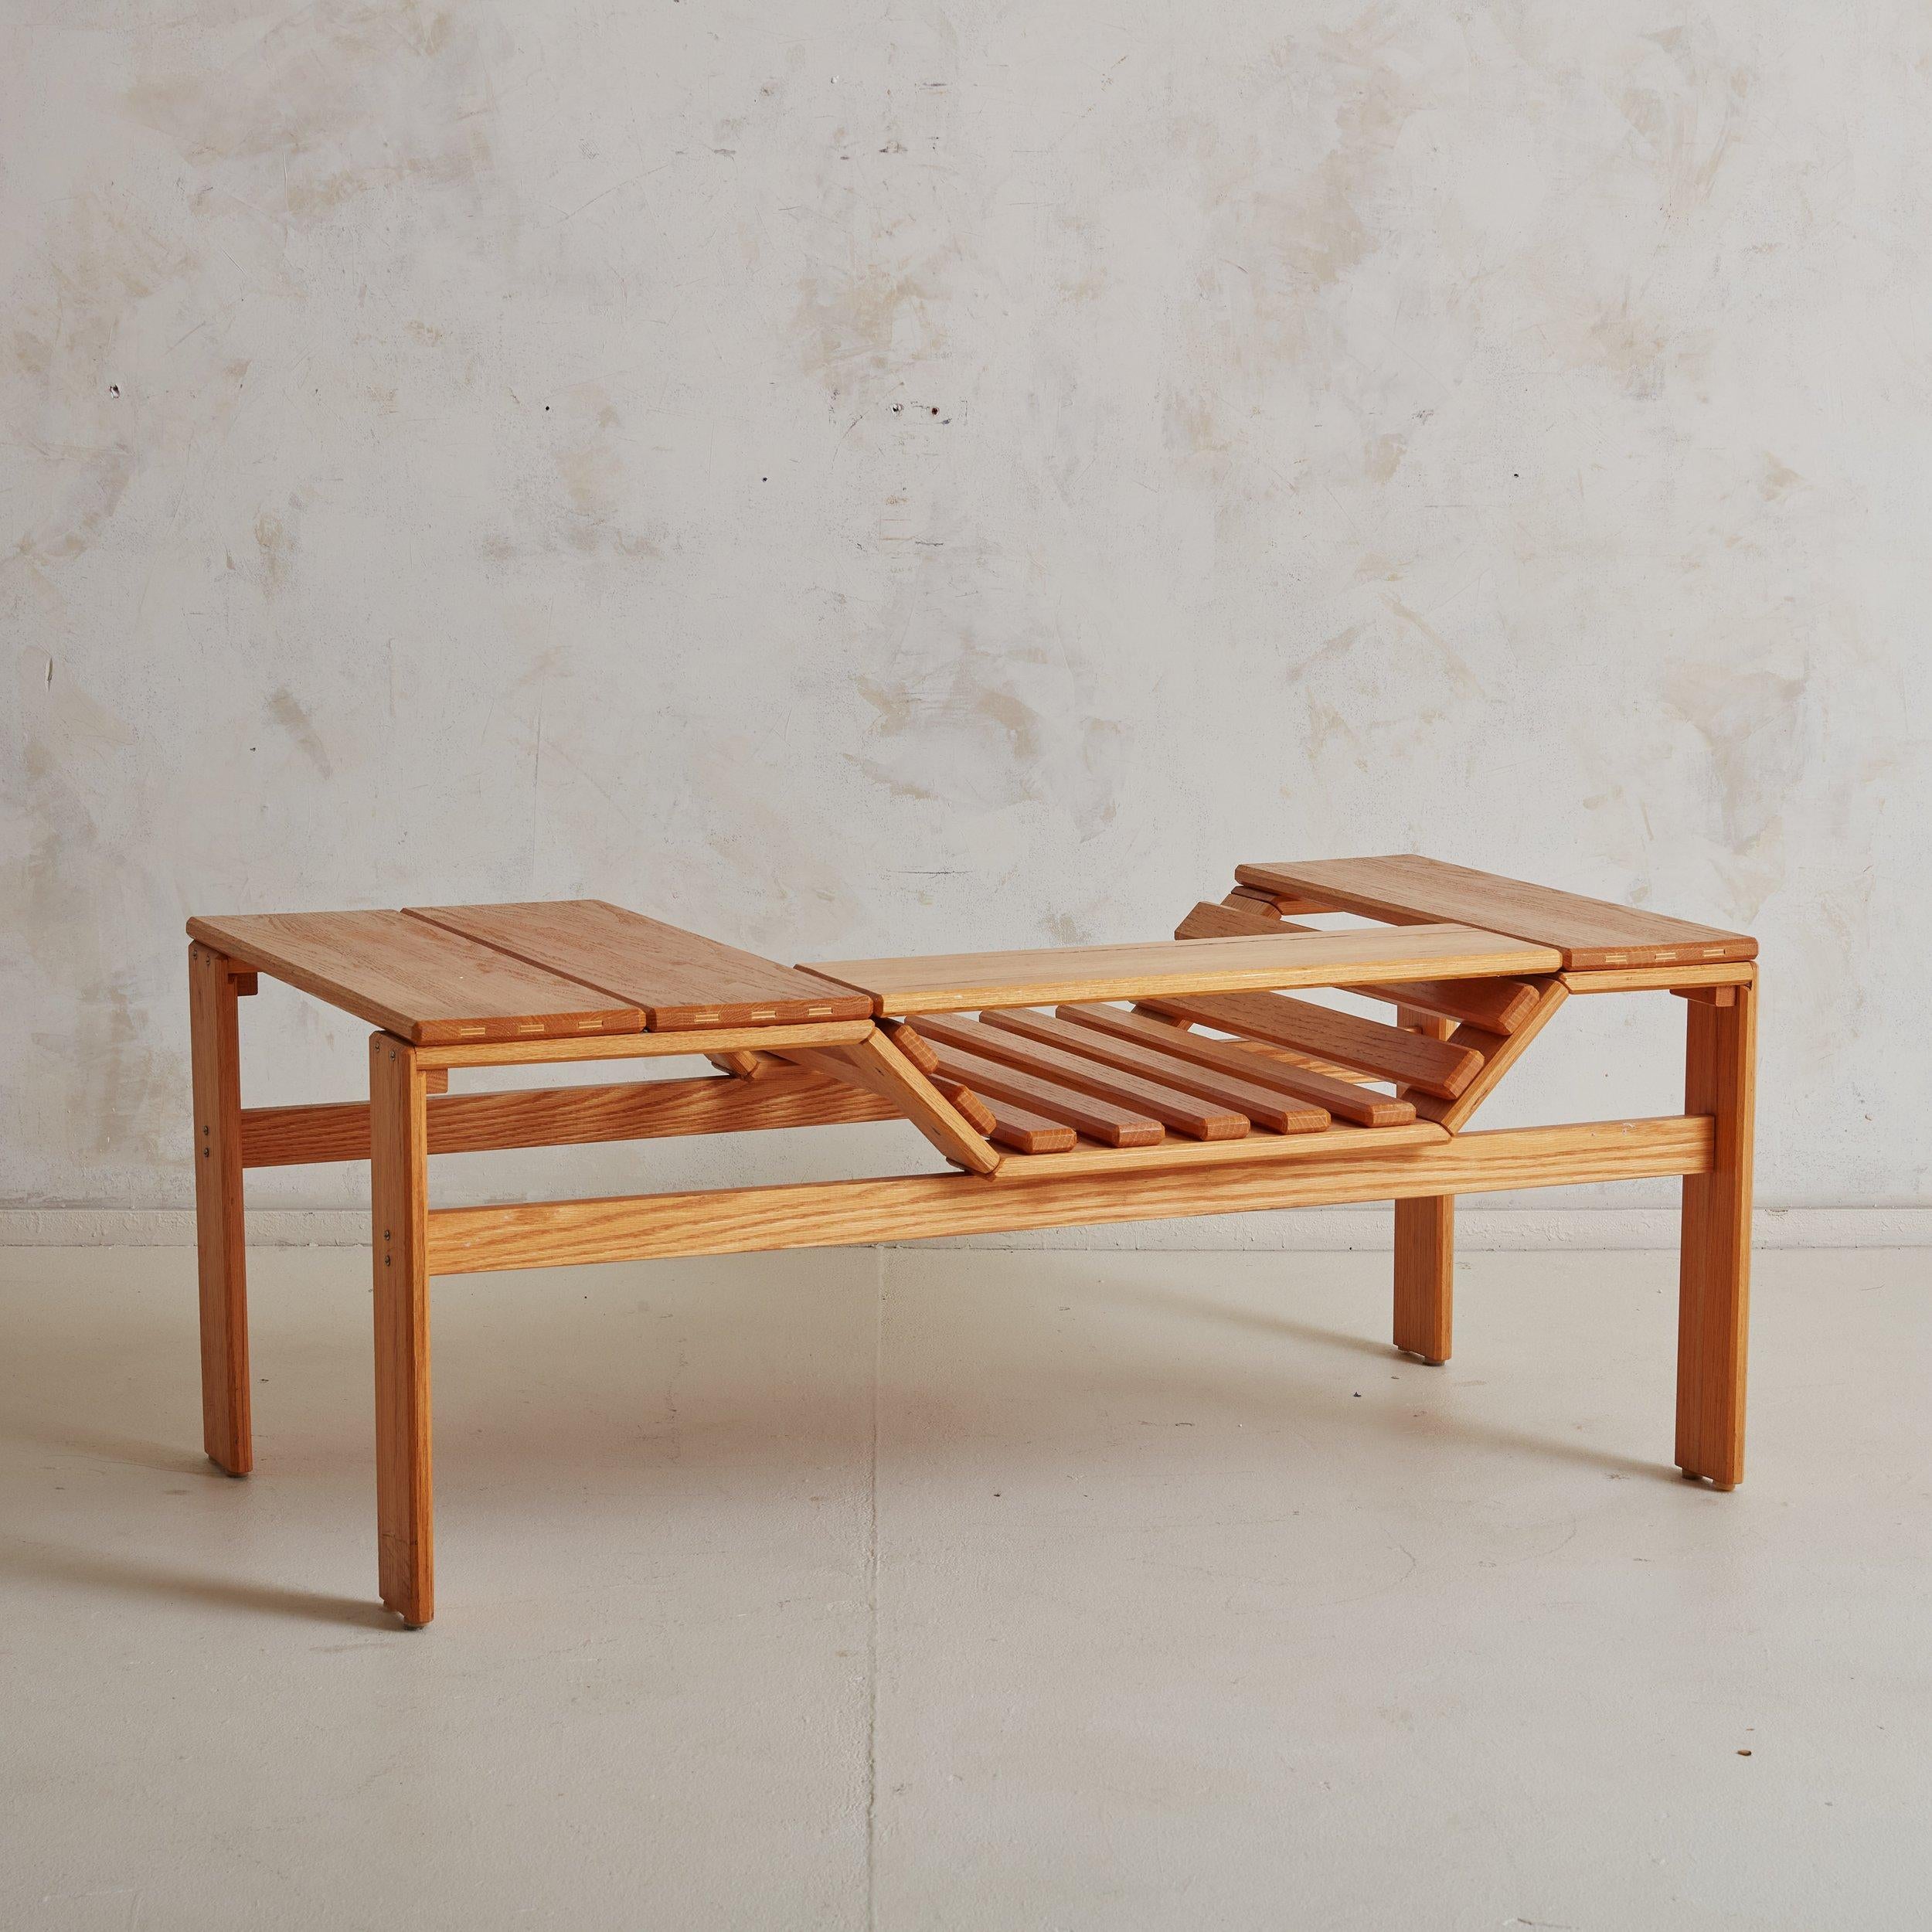 Scandinavian Modern Danish Natural Wood Bench/Coffee Table, Mid 20th Century For Sale